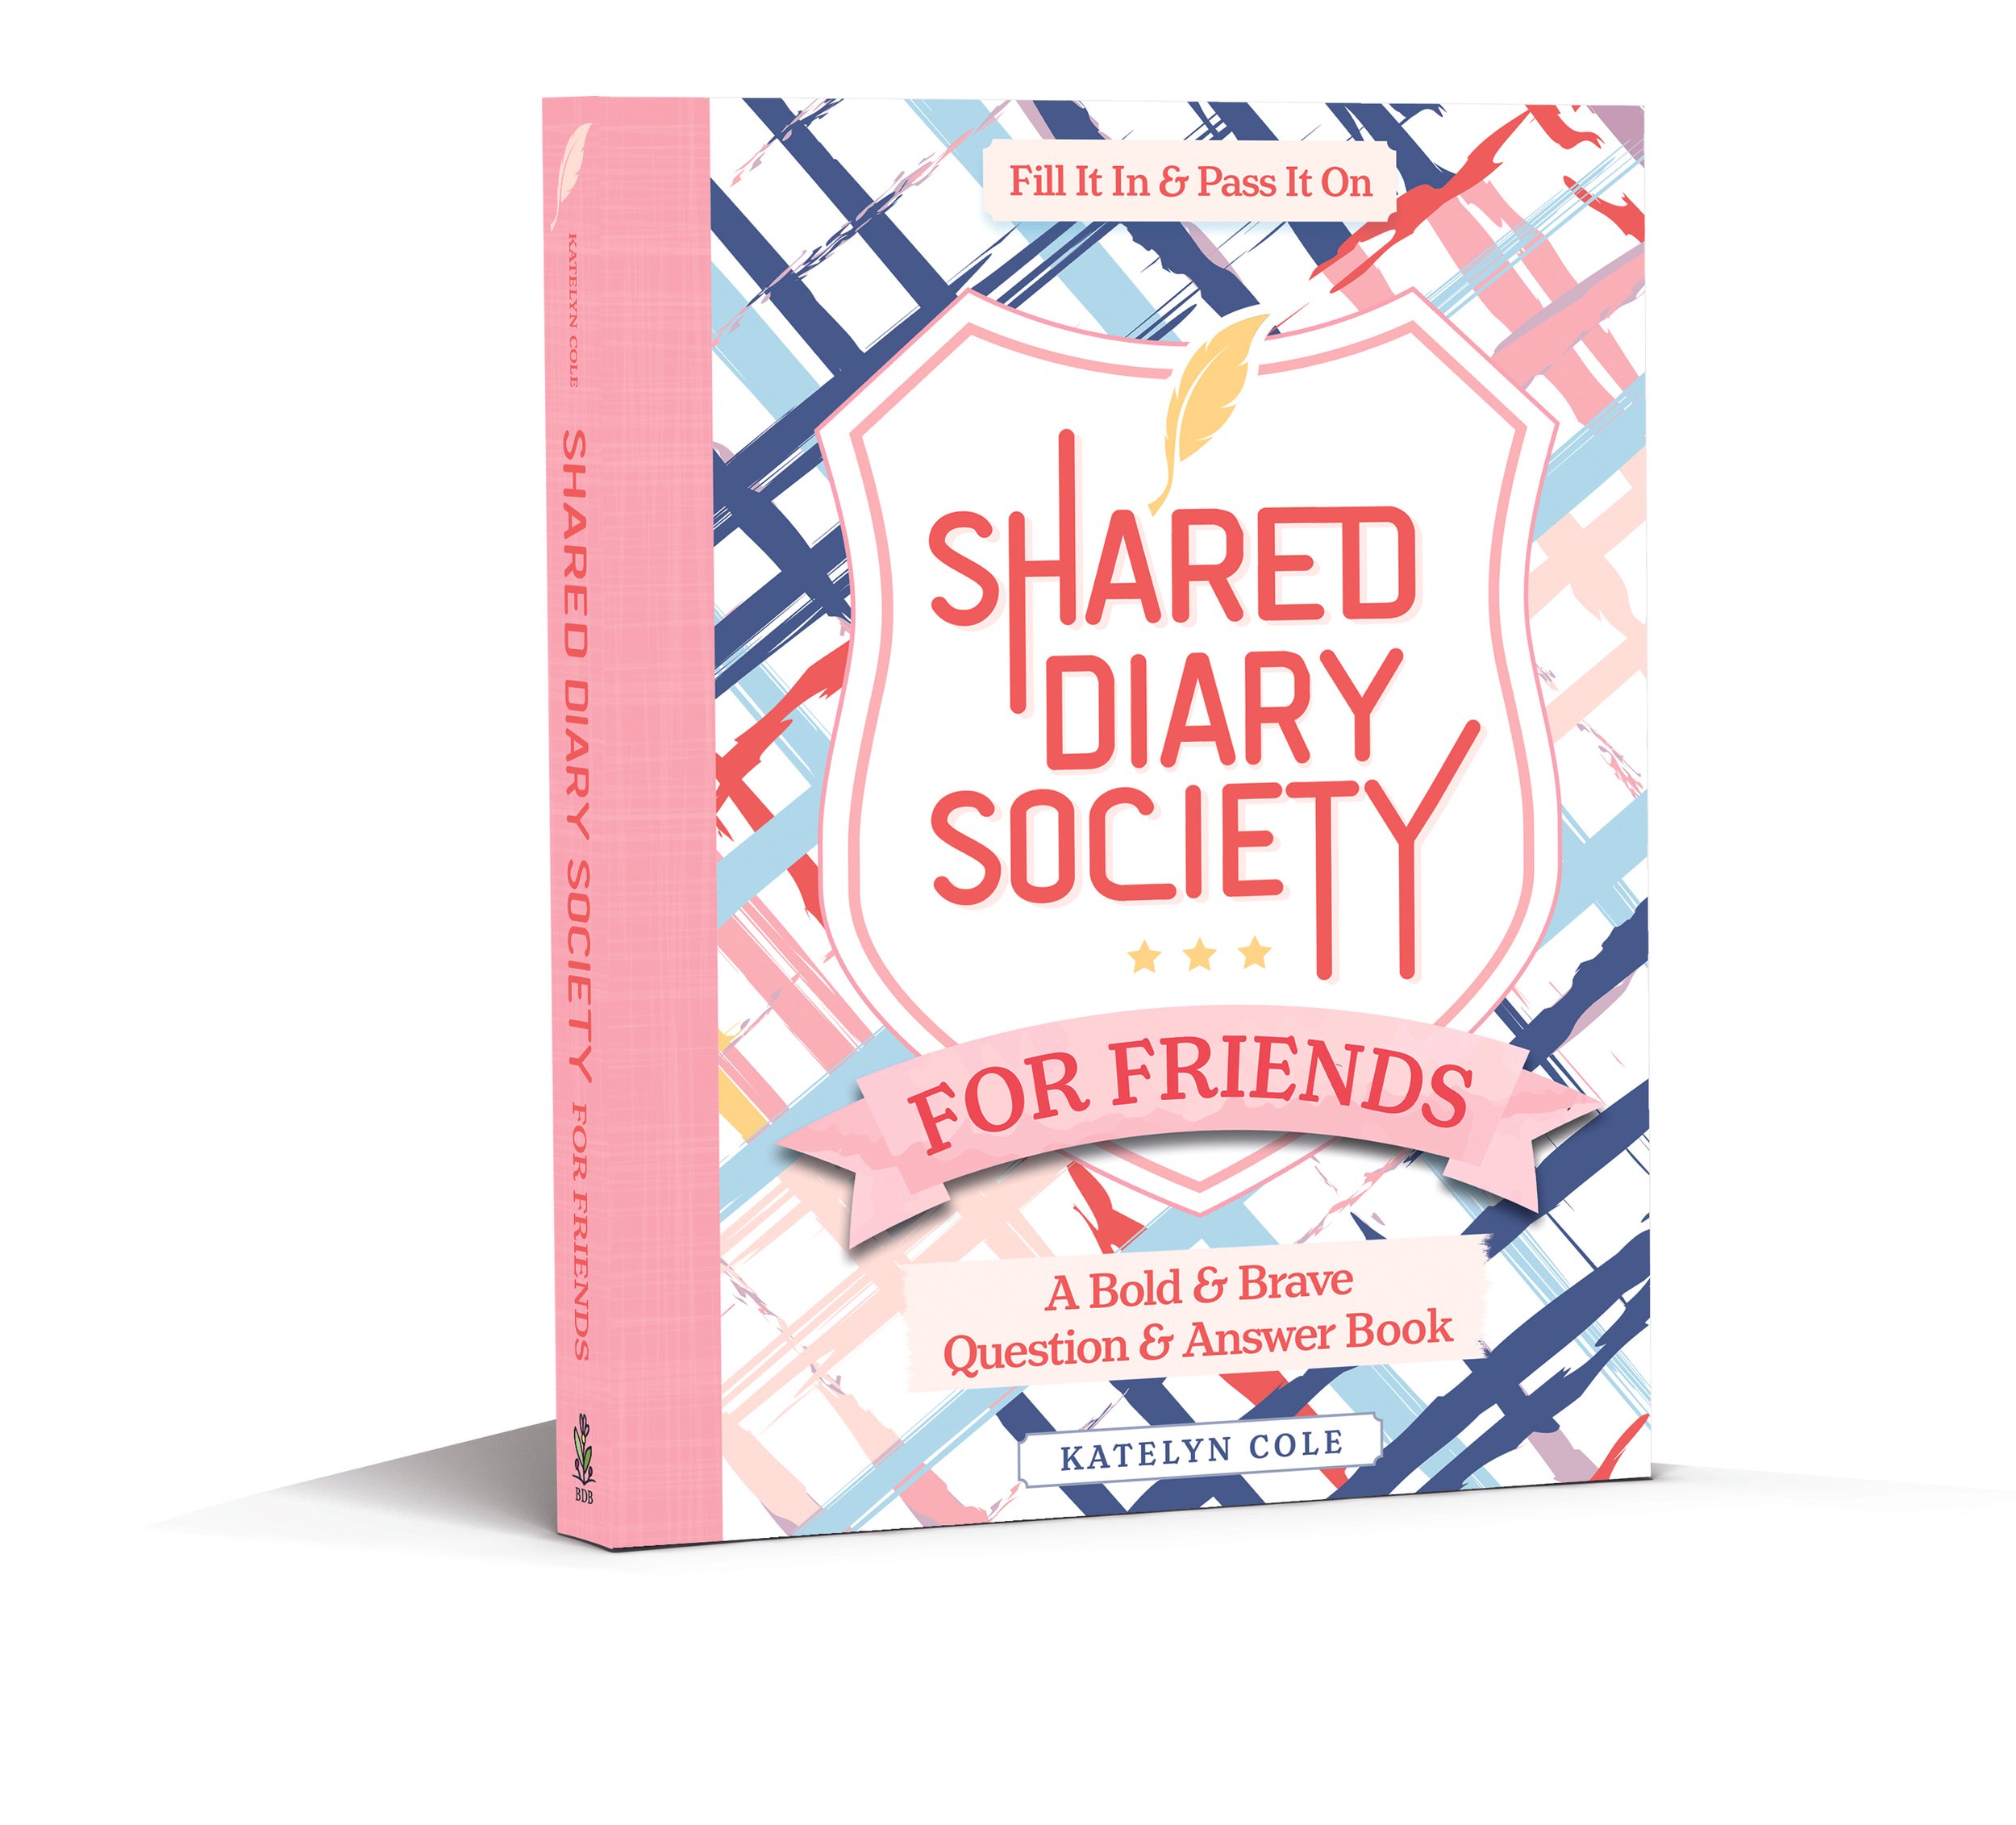 Shared Diary Society for Friends_Cover 3D 978-0-7643-6715-1.jpg